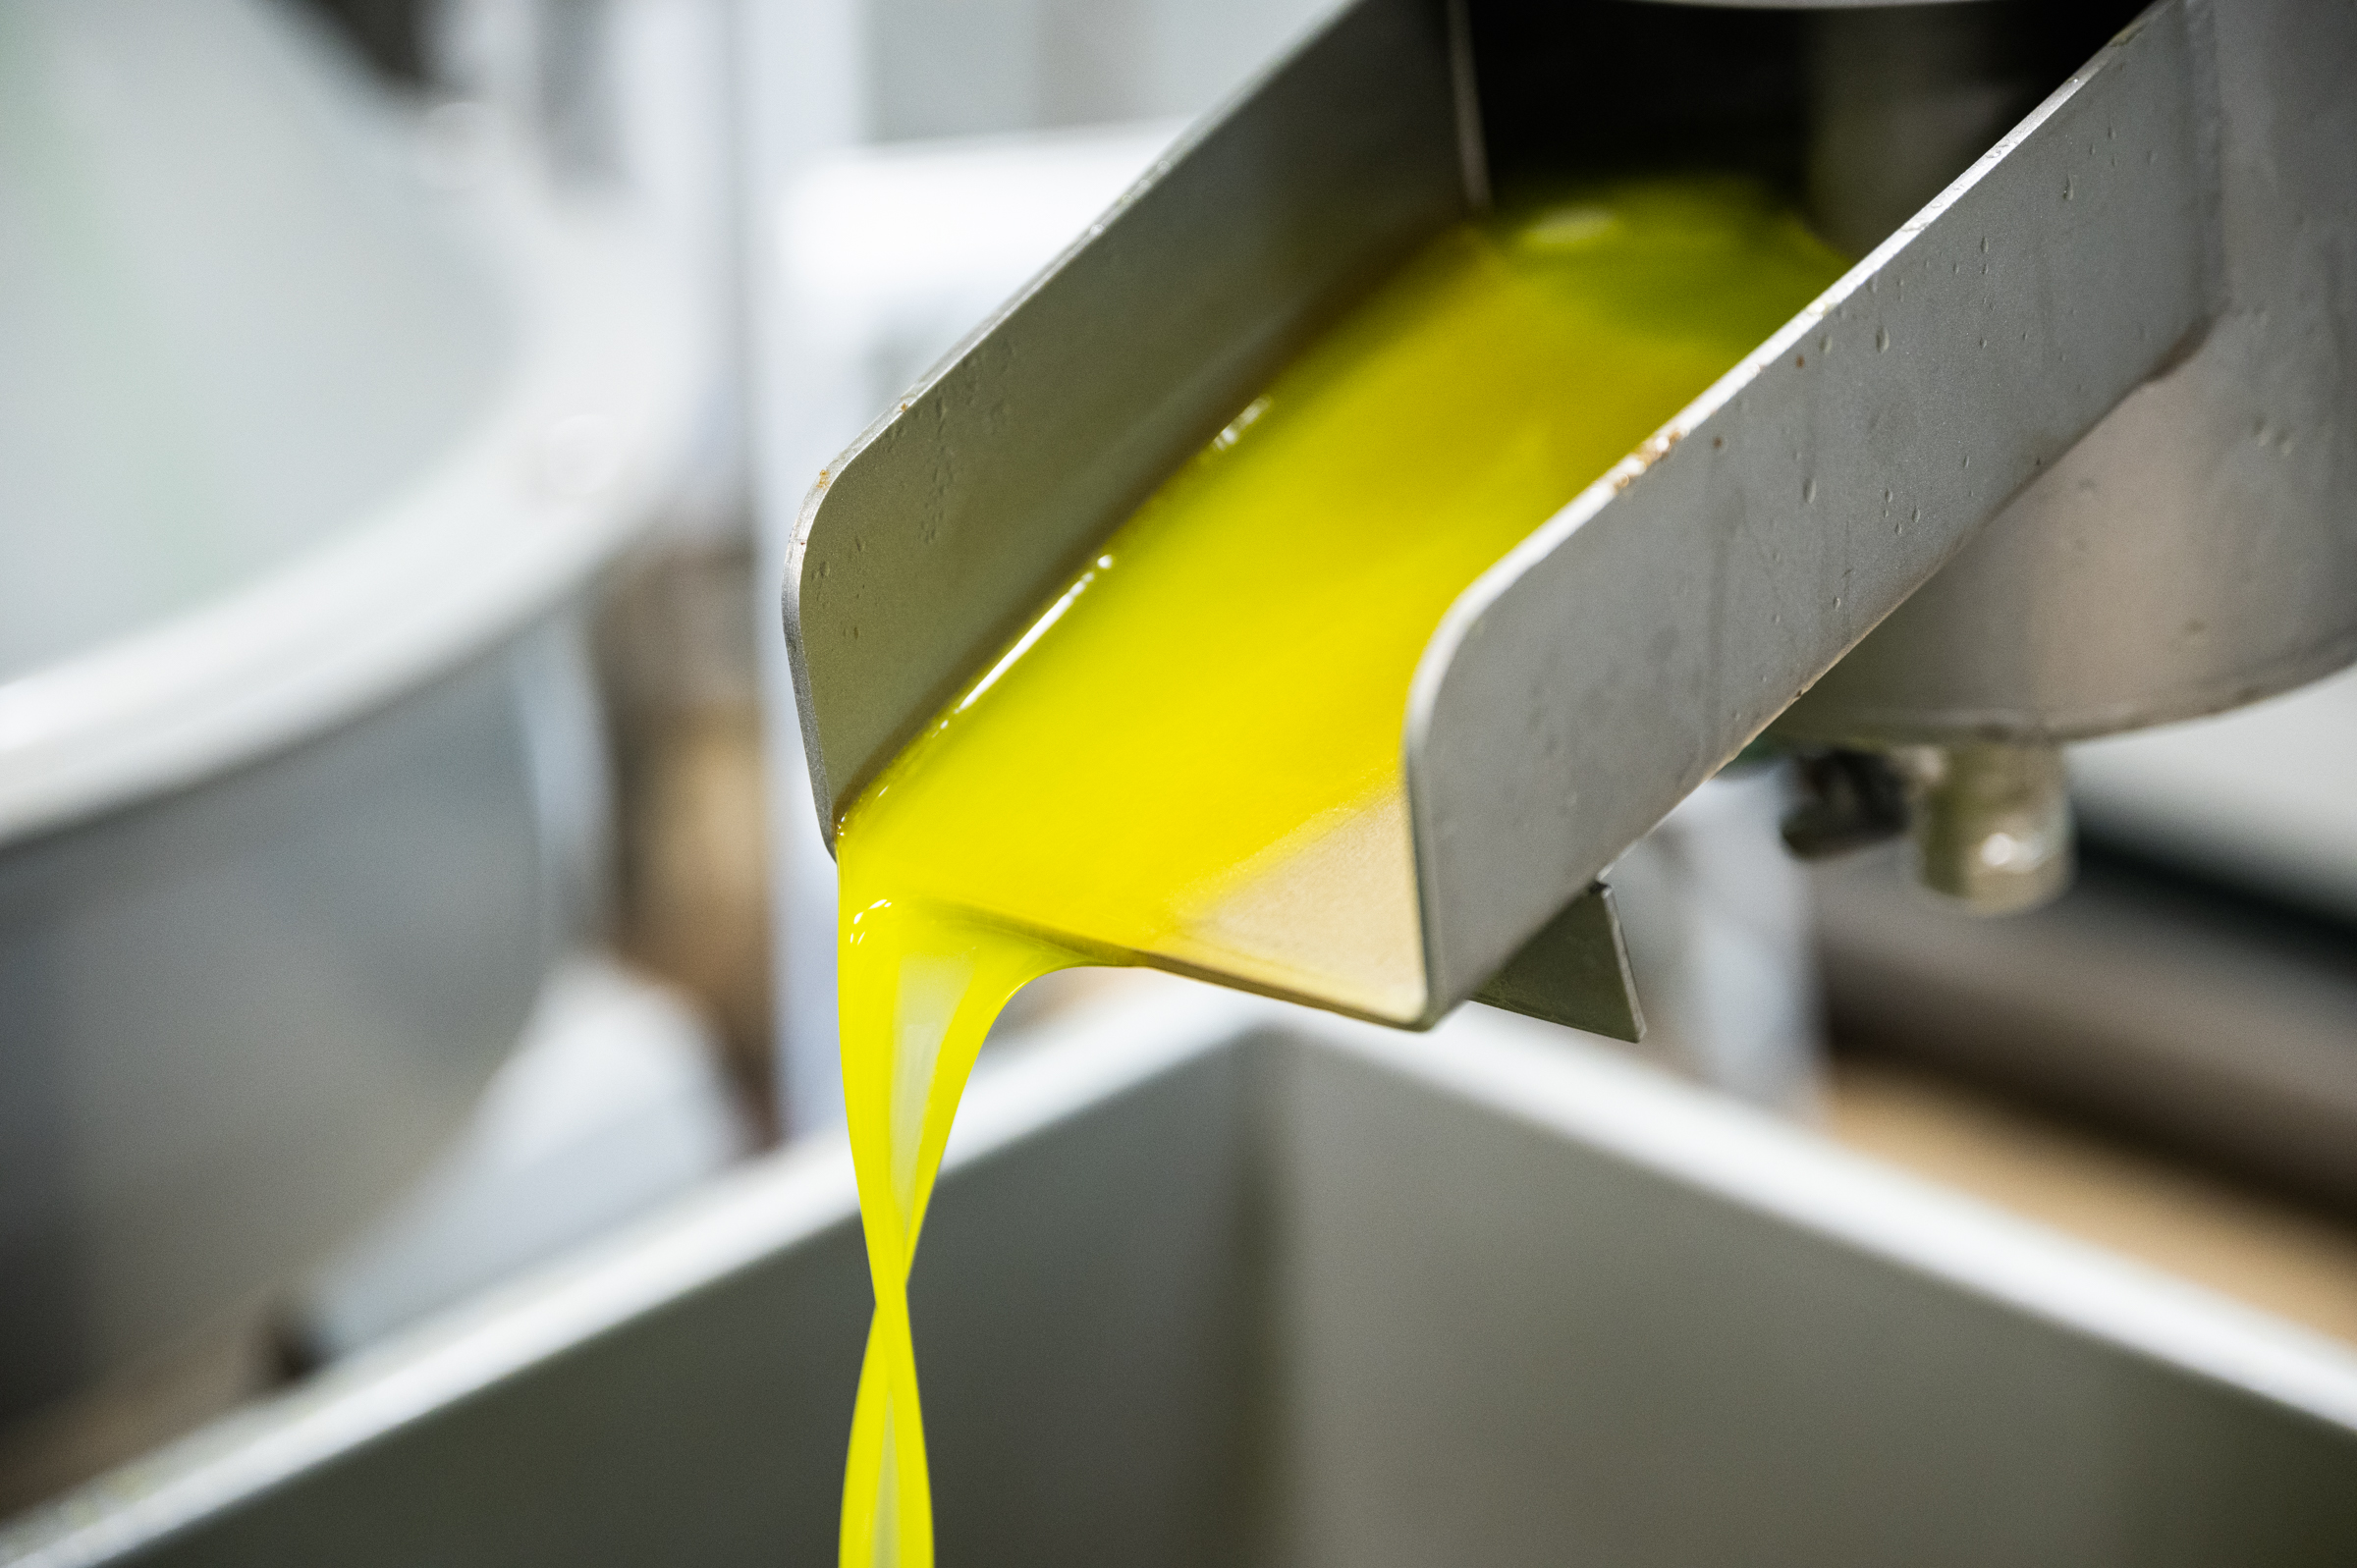 Extra virgin olive oil is separated from the olives and pits using centrifugal force